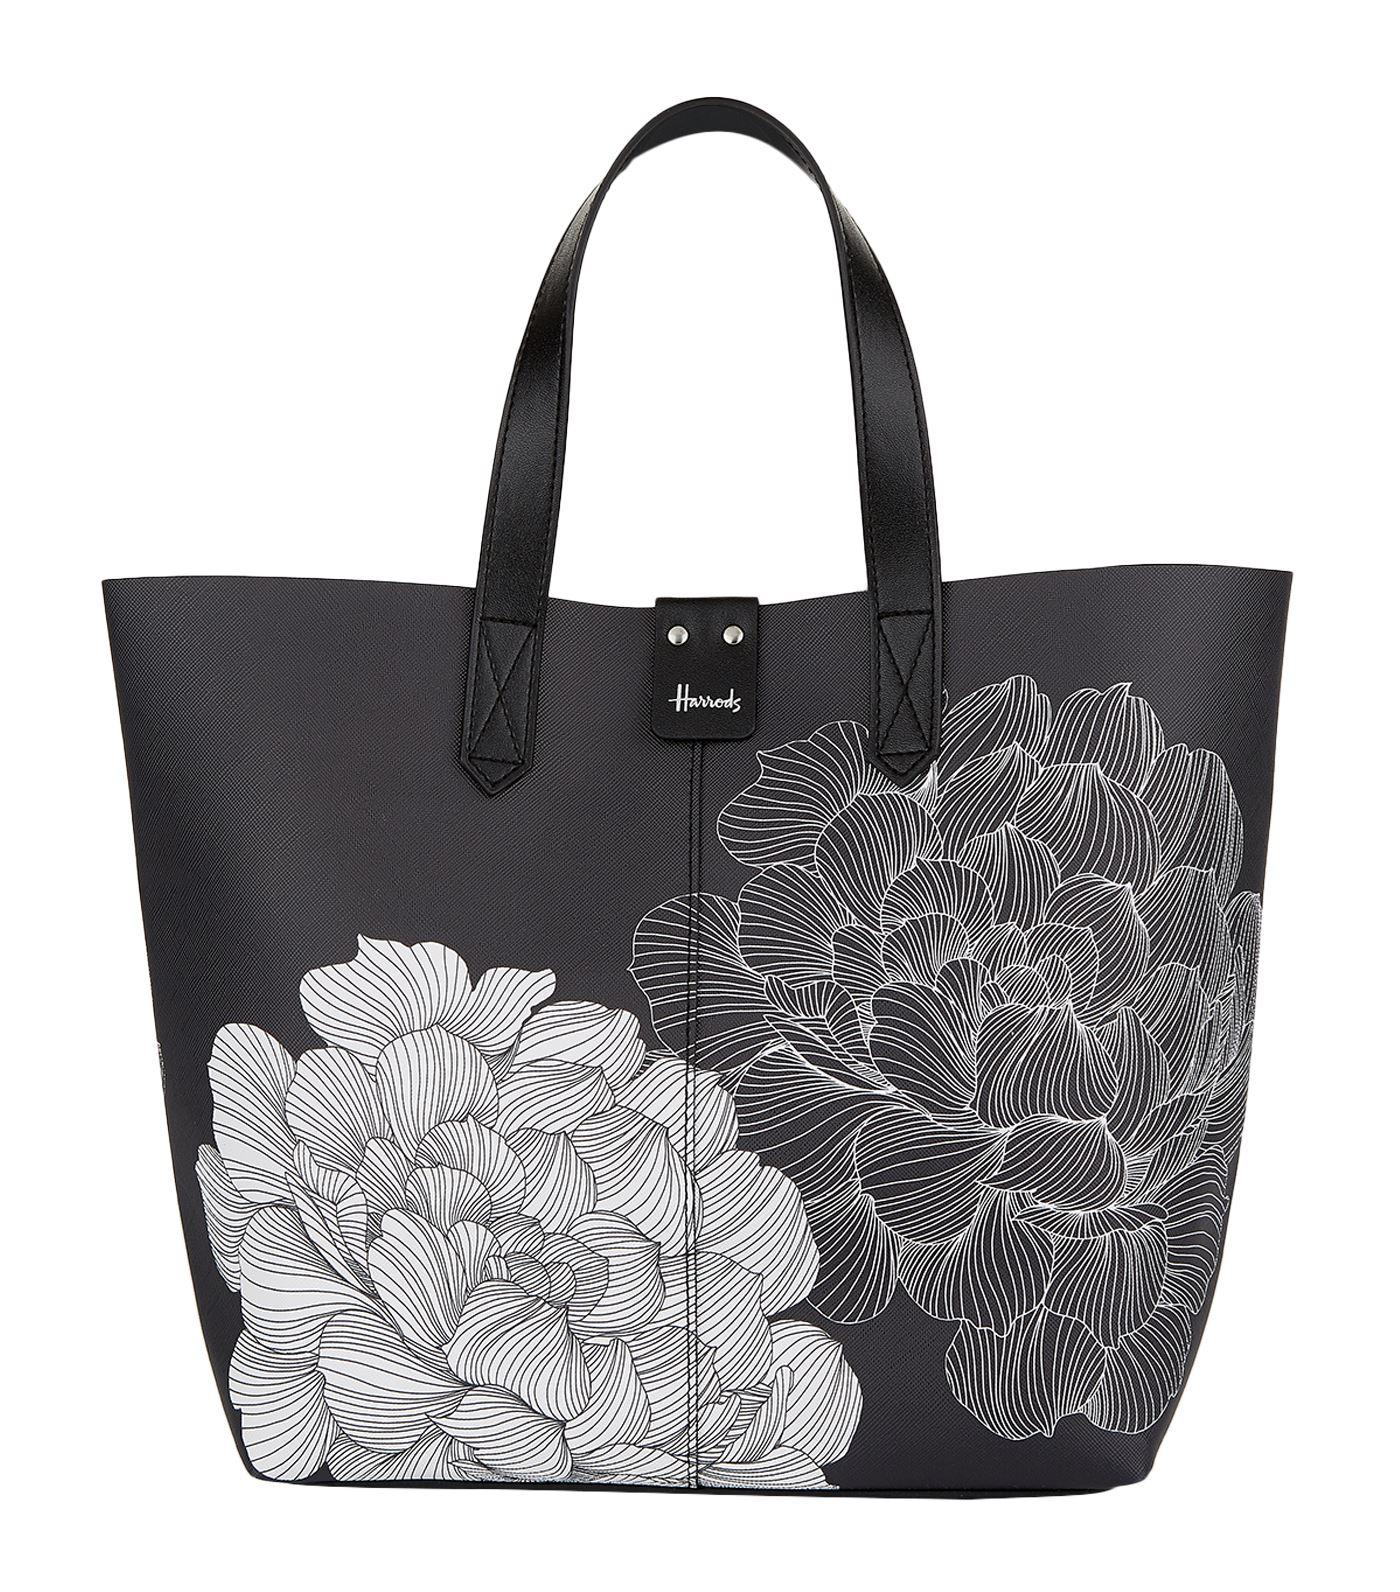 Harrods Small Floral Tote Bag in Black - Lyst